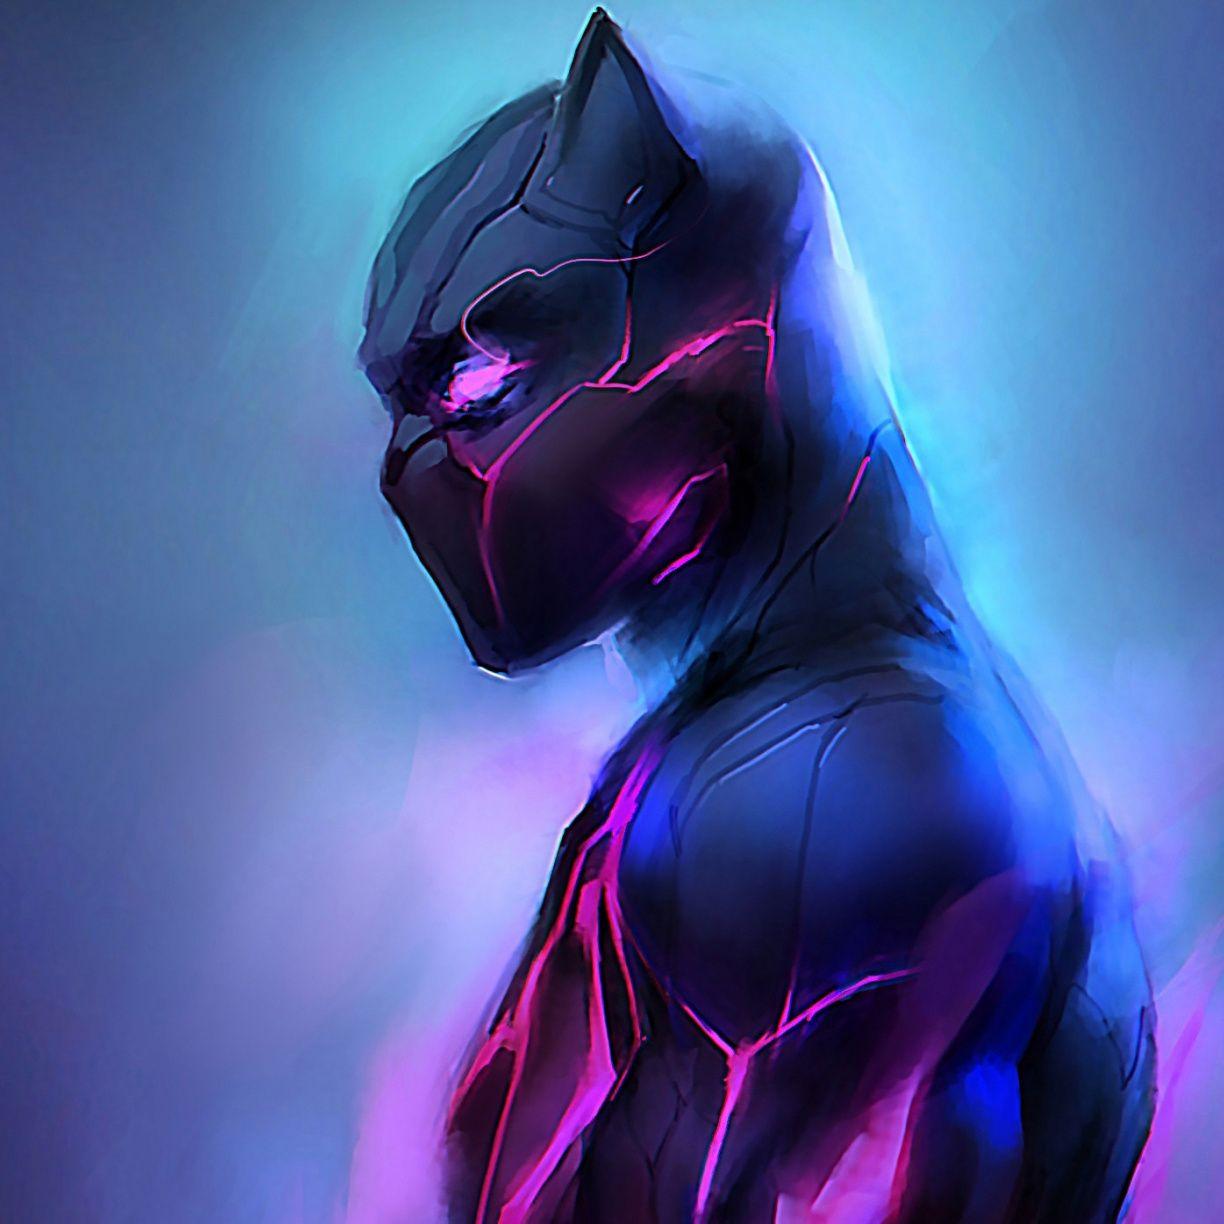 1440x2960 Resolution Suri as Black Panther 2 Samsung Galaxy Note 98  S9S8S8 QHD Wallpaper  Wallpapers Den